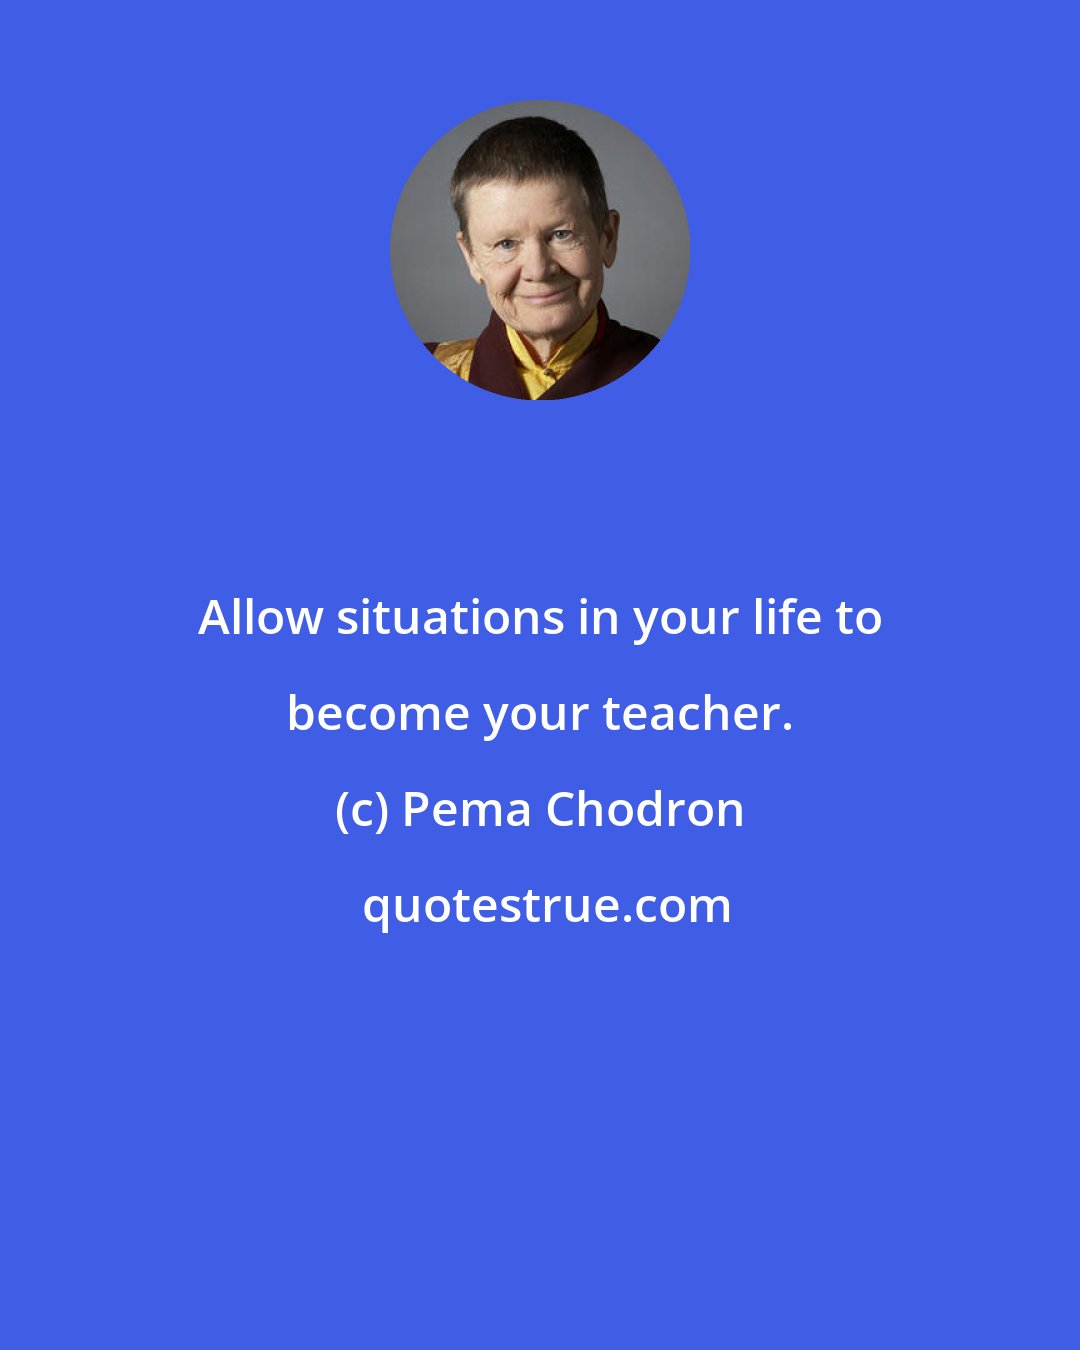 Pema Chodron: Allow situations in your life to become your teacher.